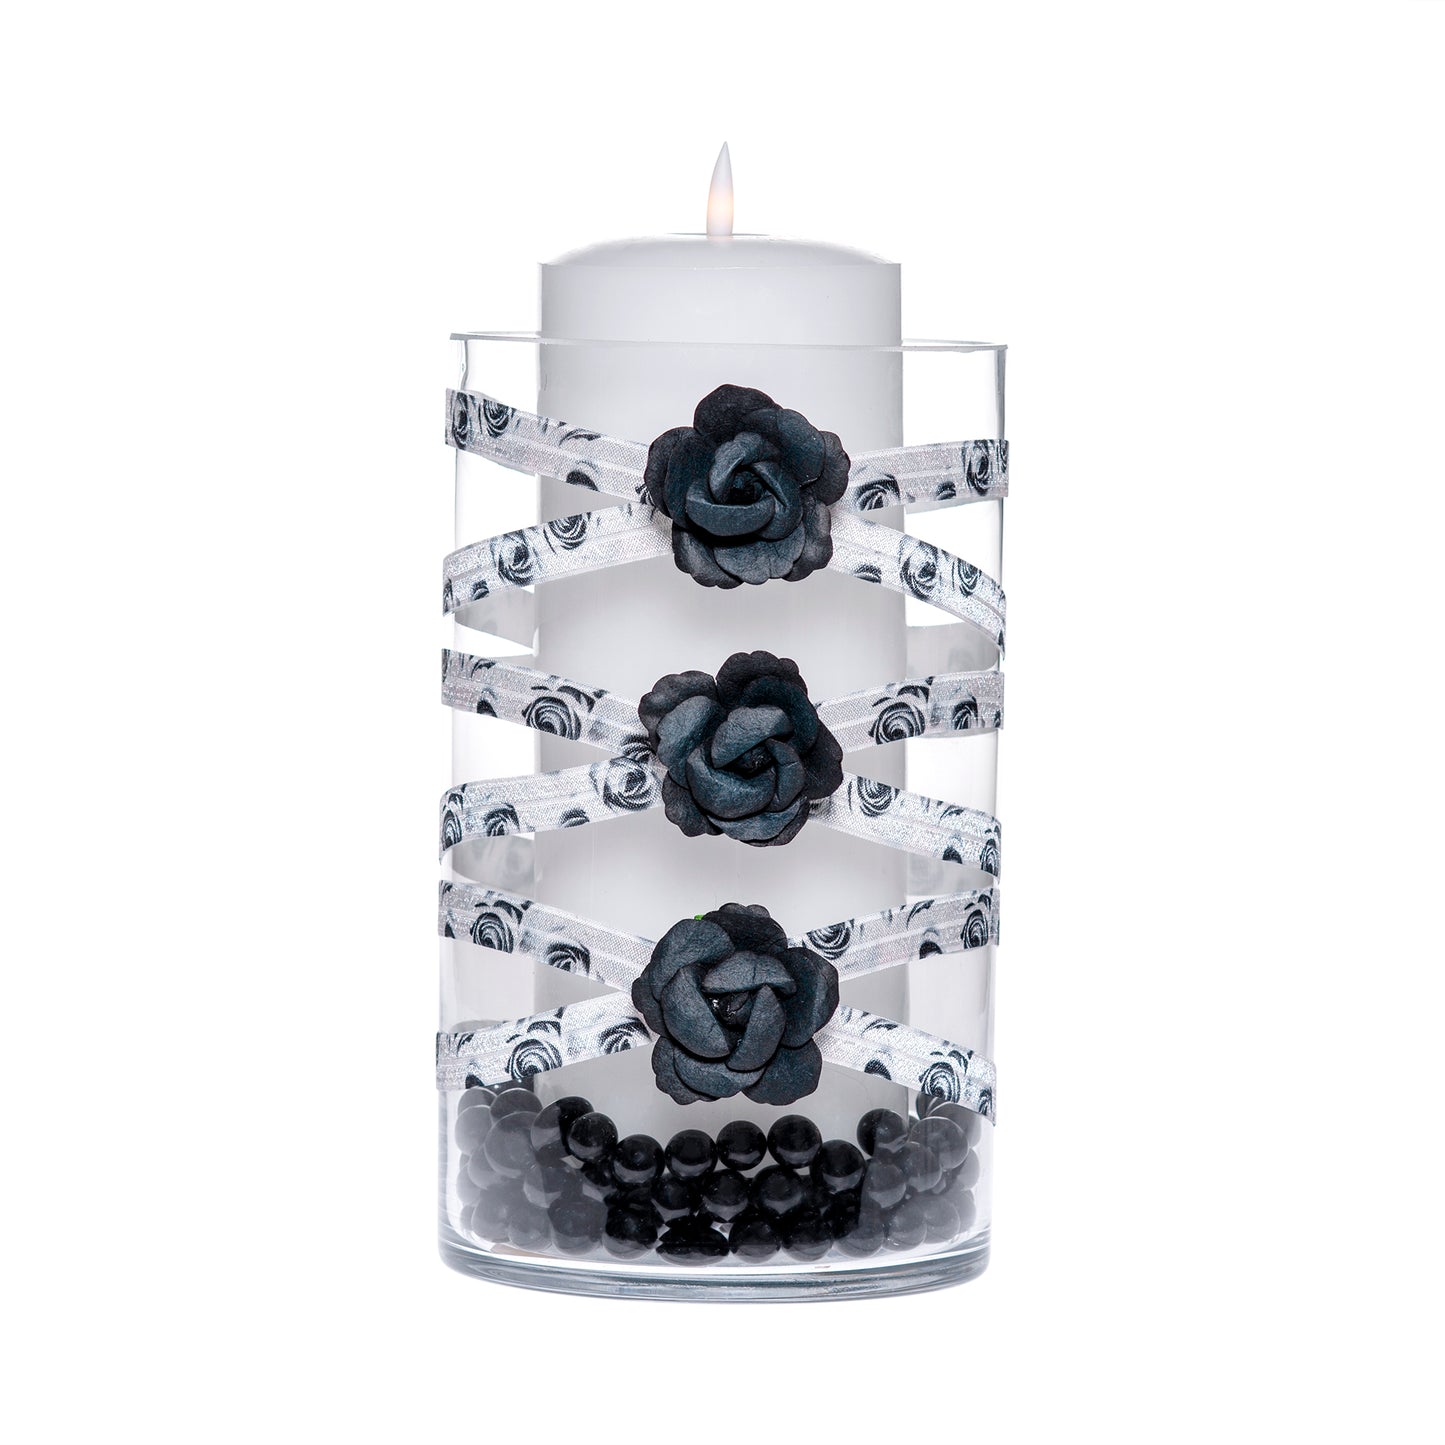 6" x 10" Cylinder White Black Roses 5X 6 Large Halloween Fall-O-Ween Collection Complete Set